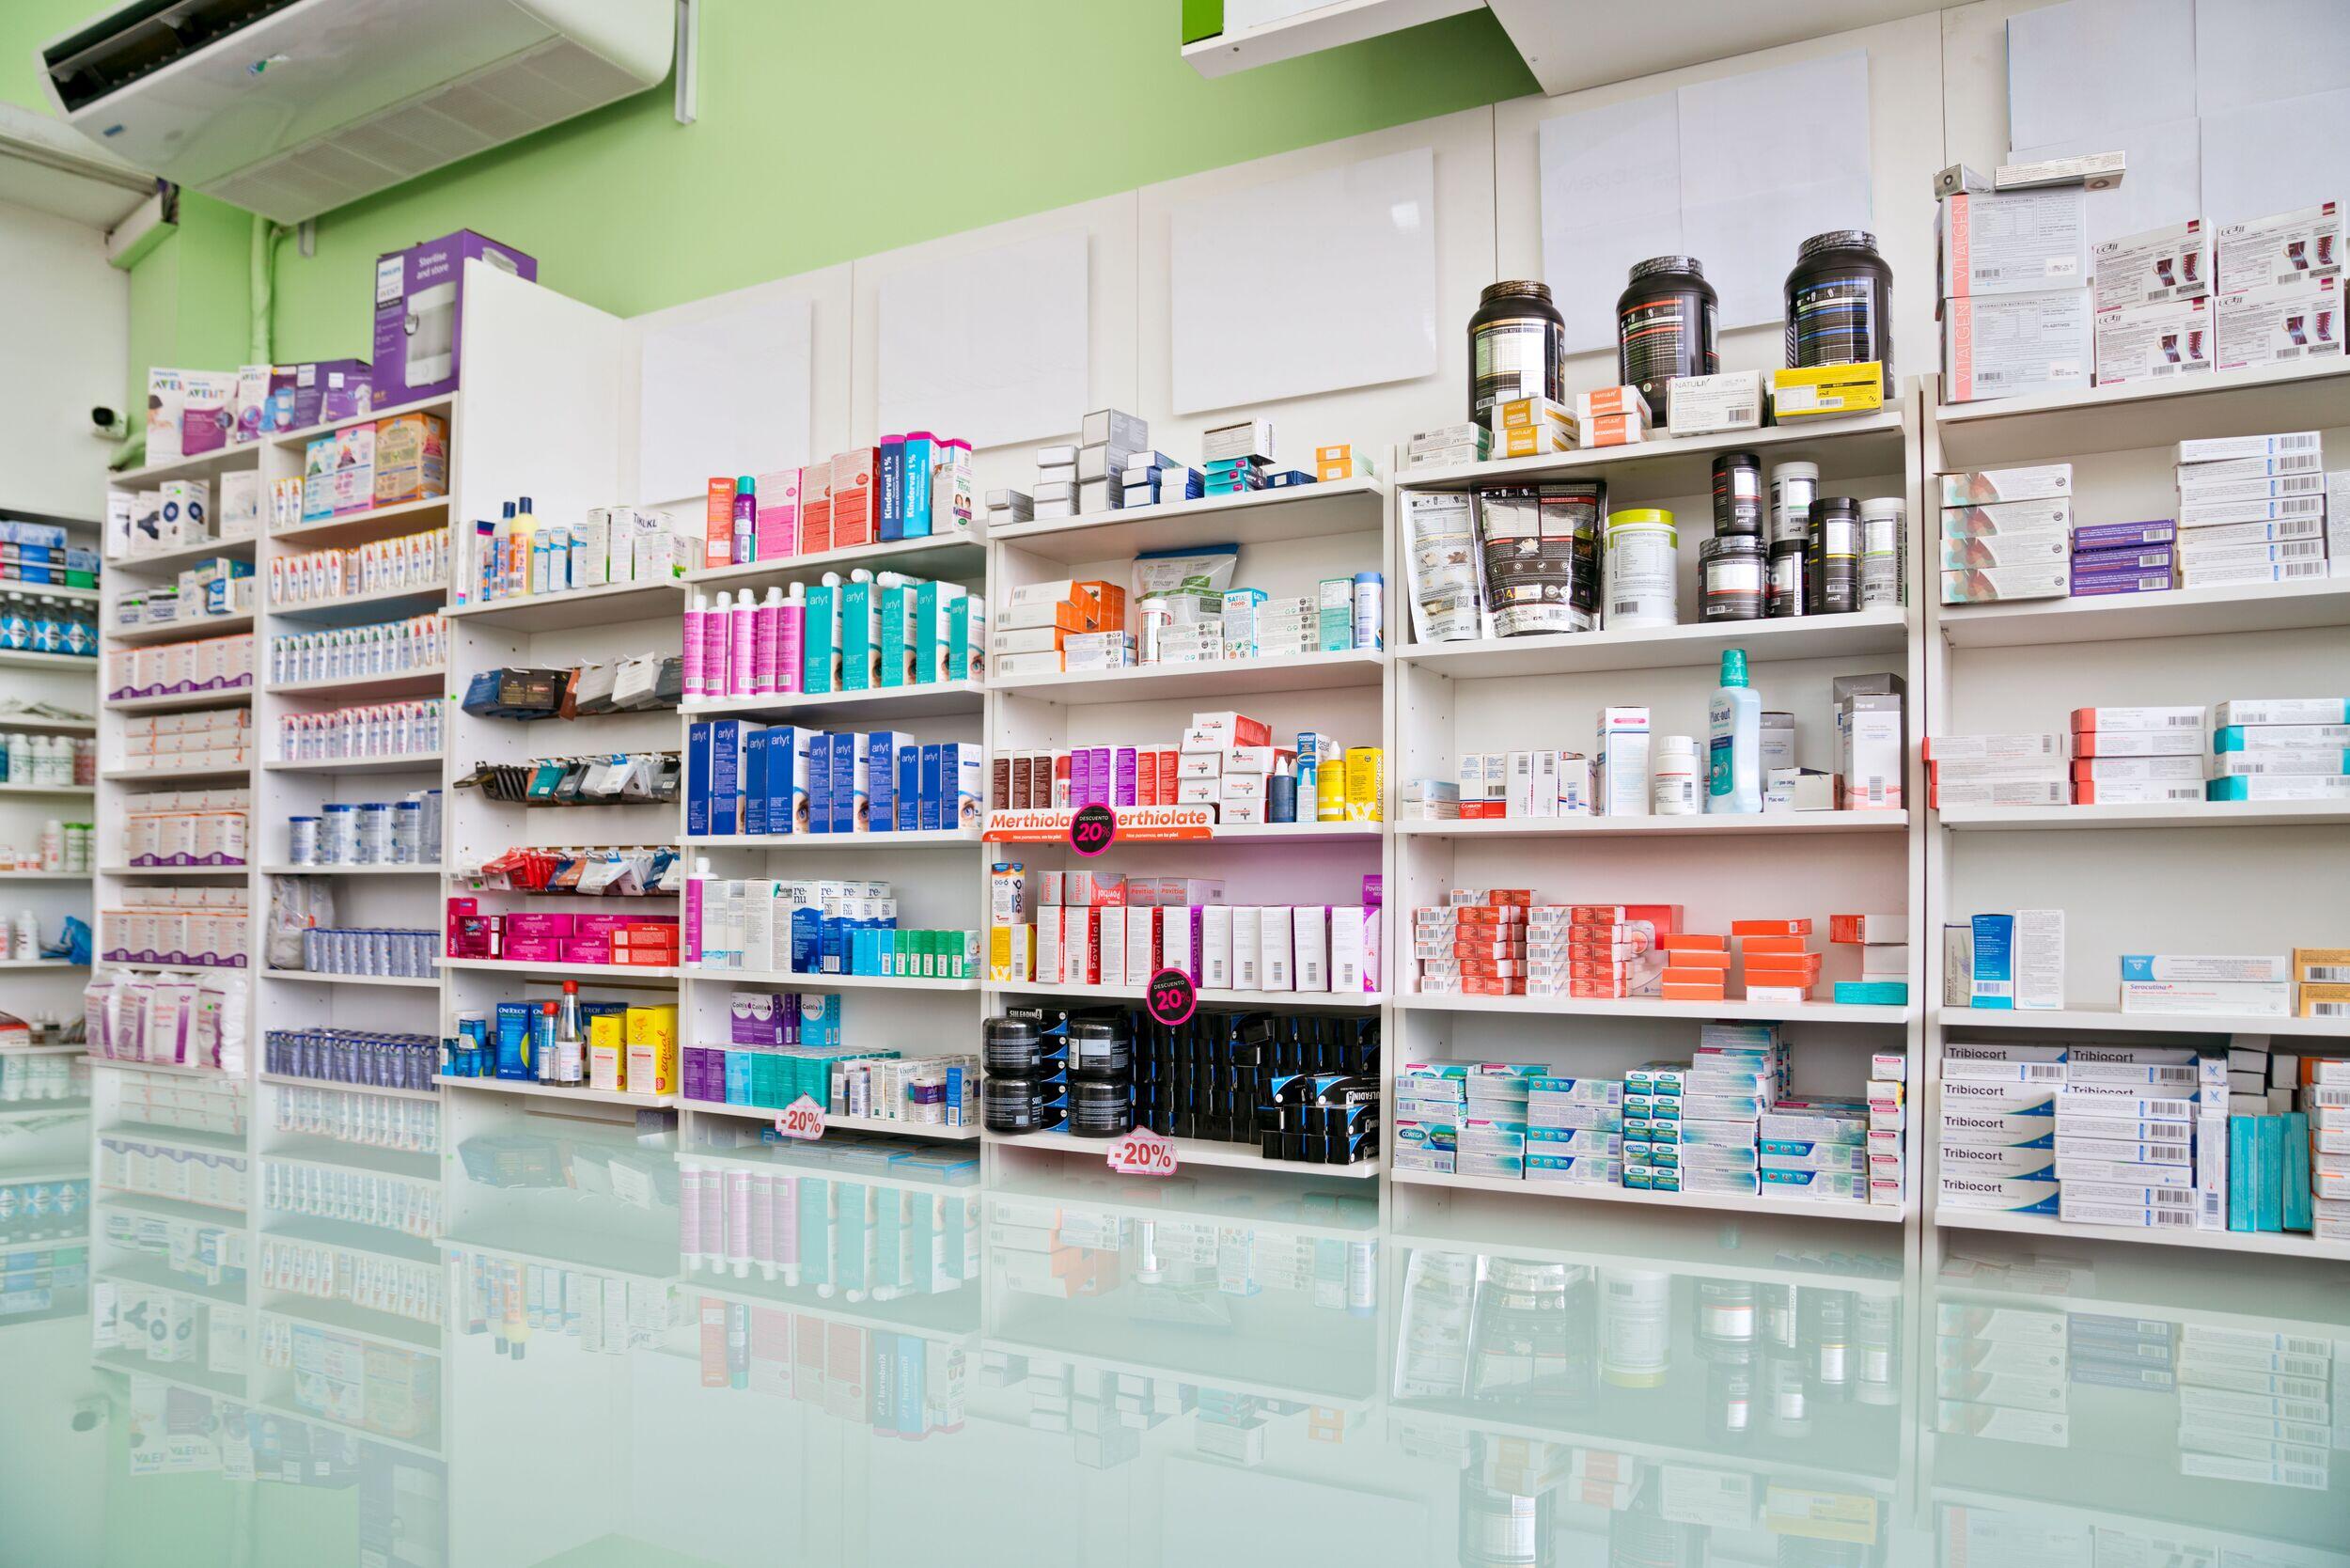 Shelves of medications in a pharmacy.